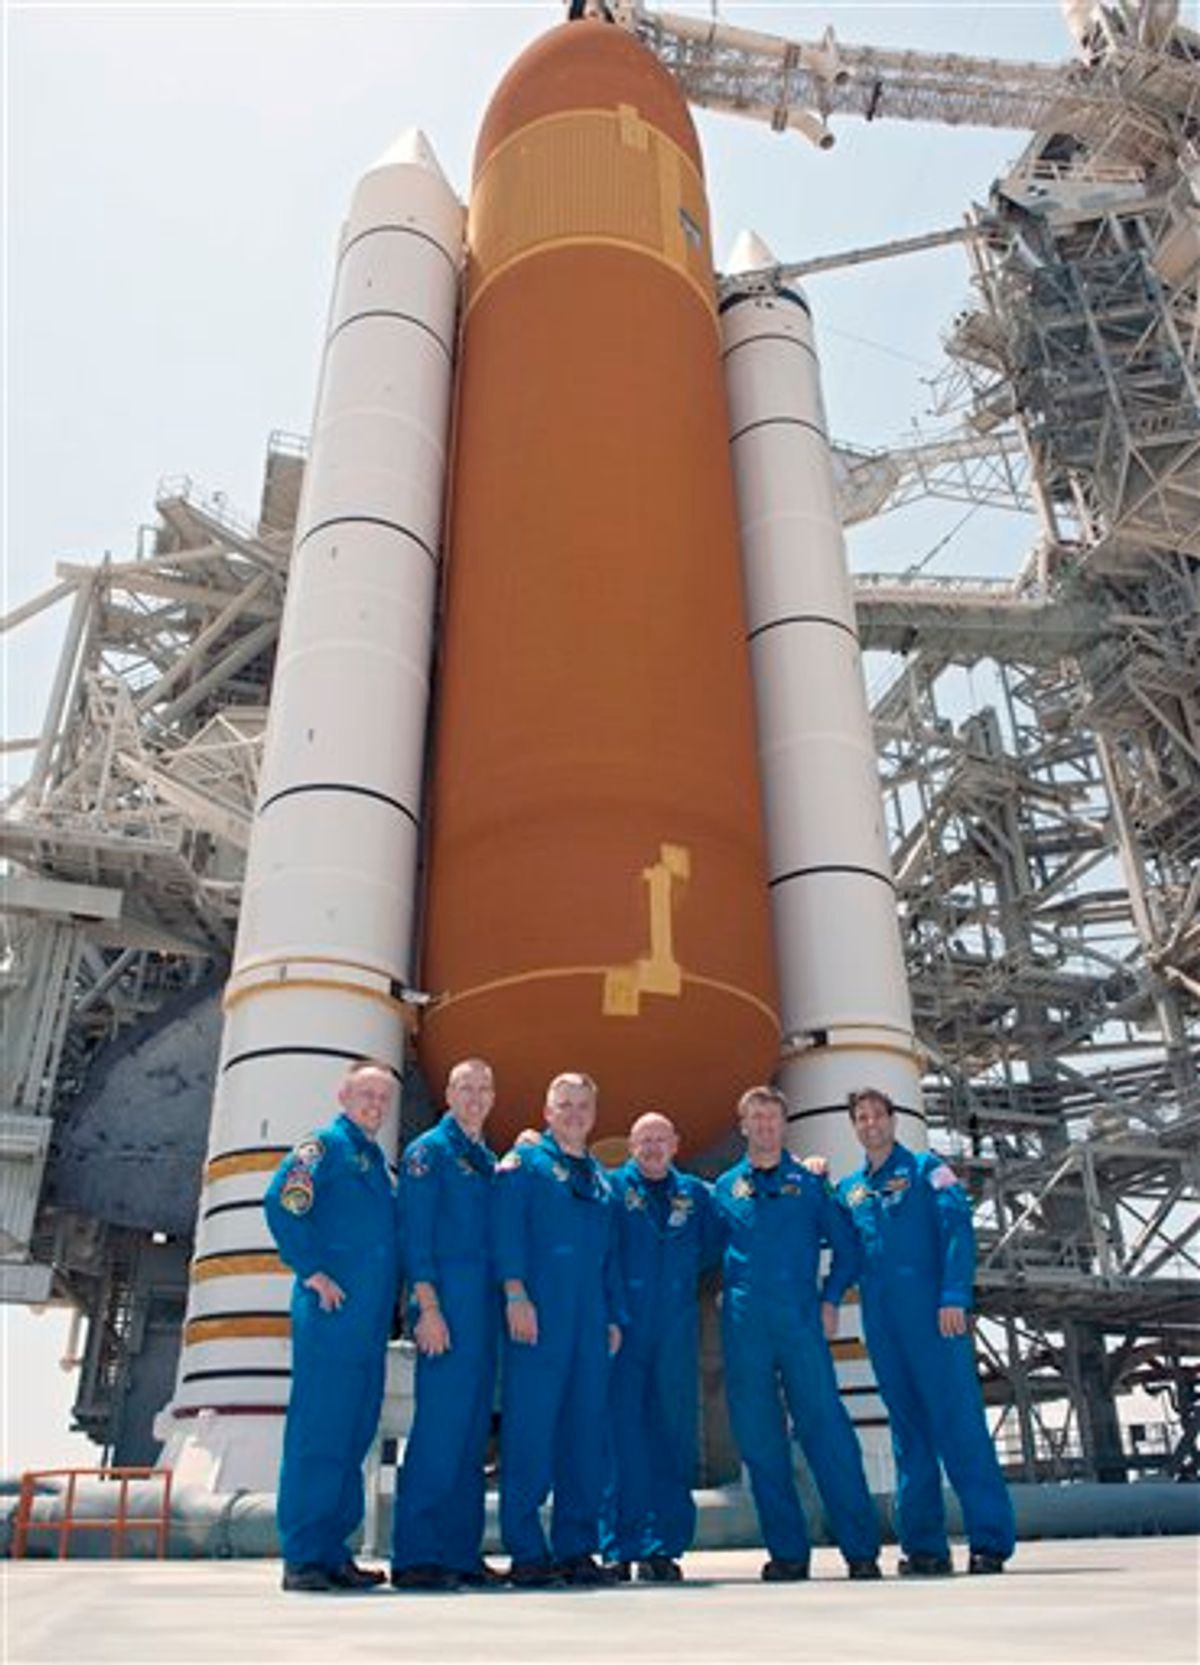 In this picture made available by NASA, the last crew of the space shuttle Endeavour stands together on Launch Pad 39A in front of its external fuel tank and solid rocket boosters at the Kennedy Space Center in Cape Canaveral, Fla. on Thursday, April 28, 2011, one day before its final flight. From left are Mission Specialists Michael Fincke, Andrew Feustel, Pilot Greg H. Johnson, Commander Mark Kelly, European Space Agency astronaut Roberto Vittori and Mission Specialist Greg Chamitoff. (AP Photo/NASA, Kim Shiflett)    (AP)